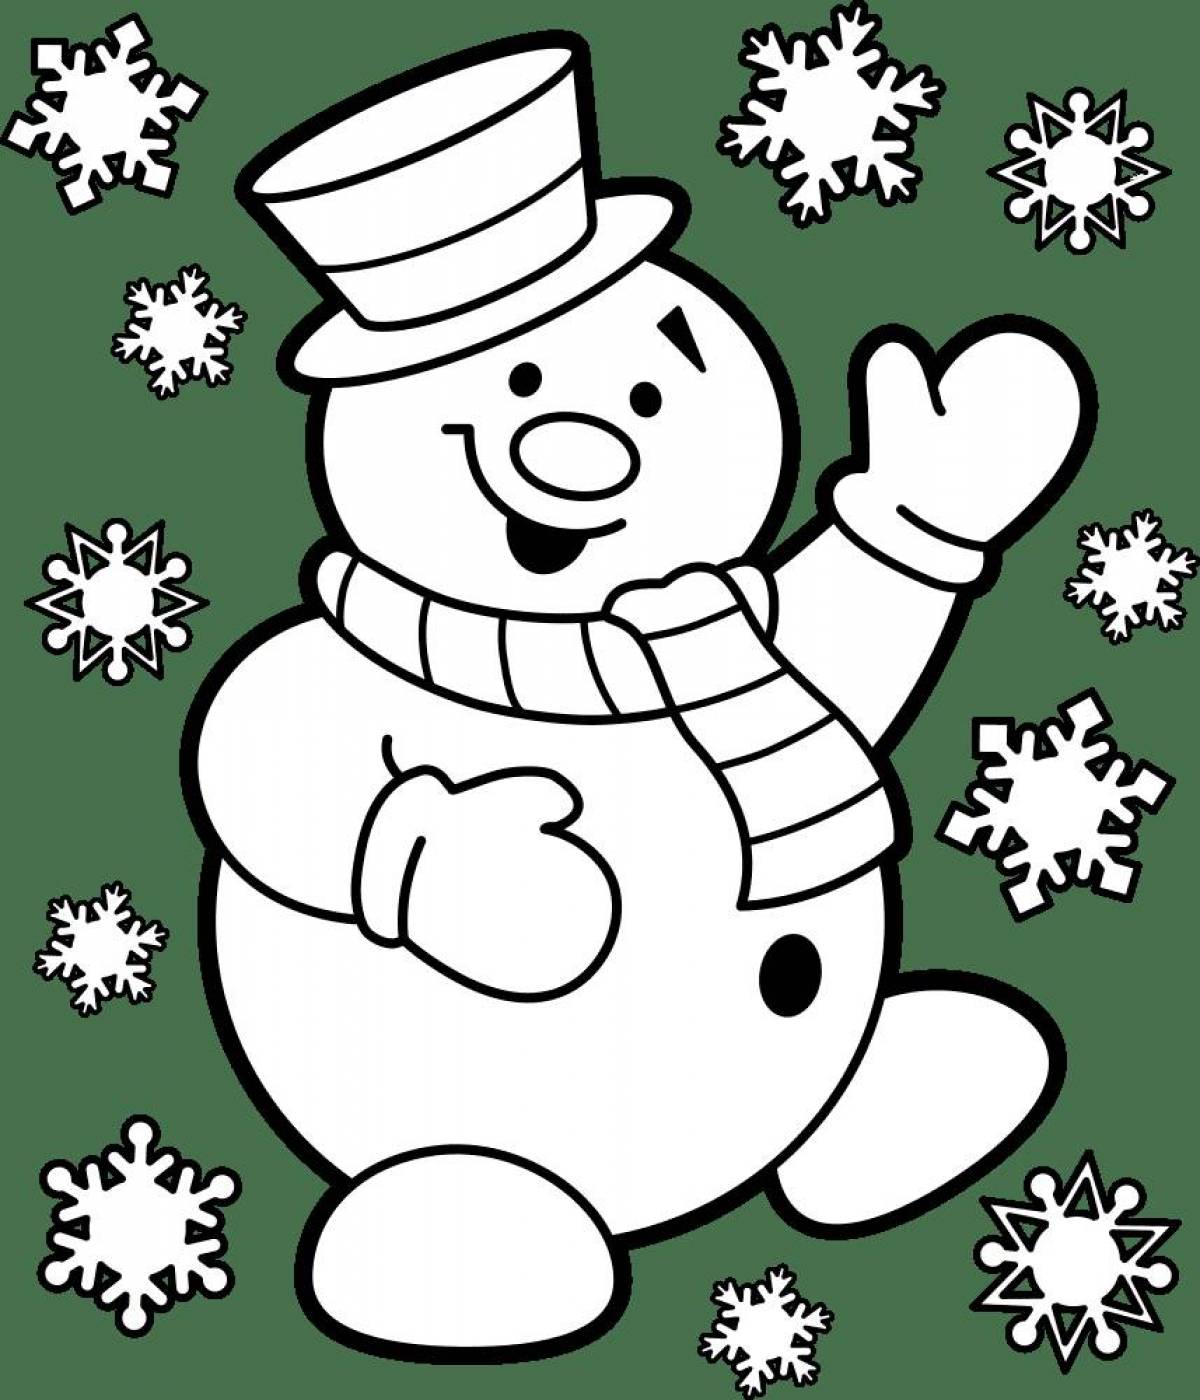 Funny children's Christmas coloring book